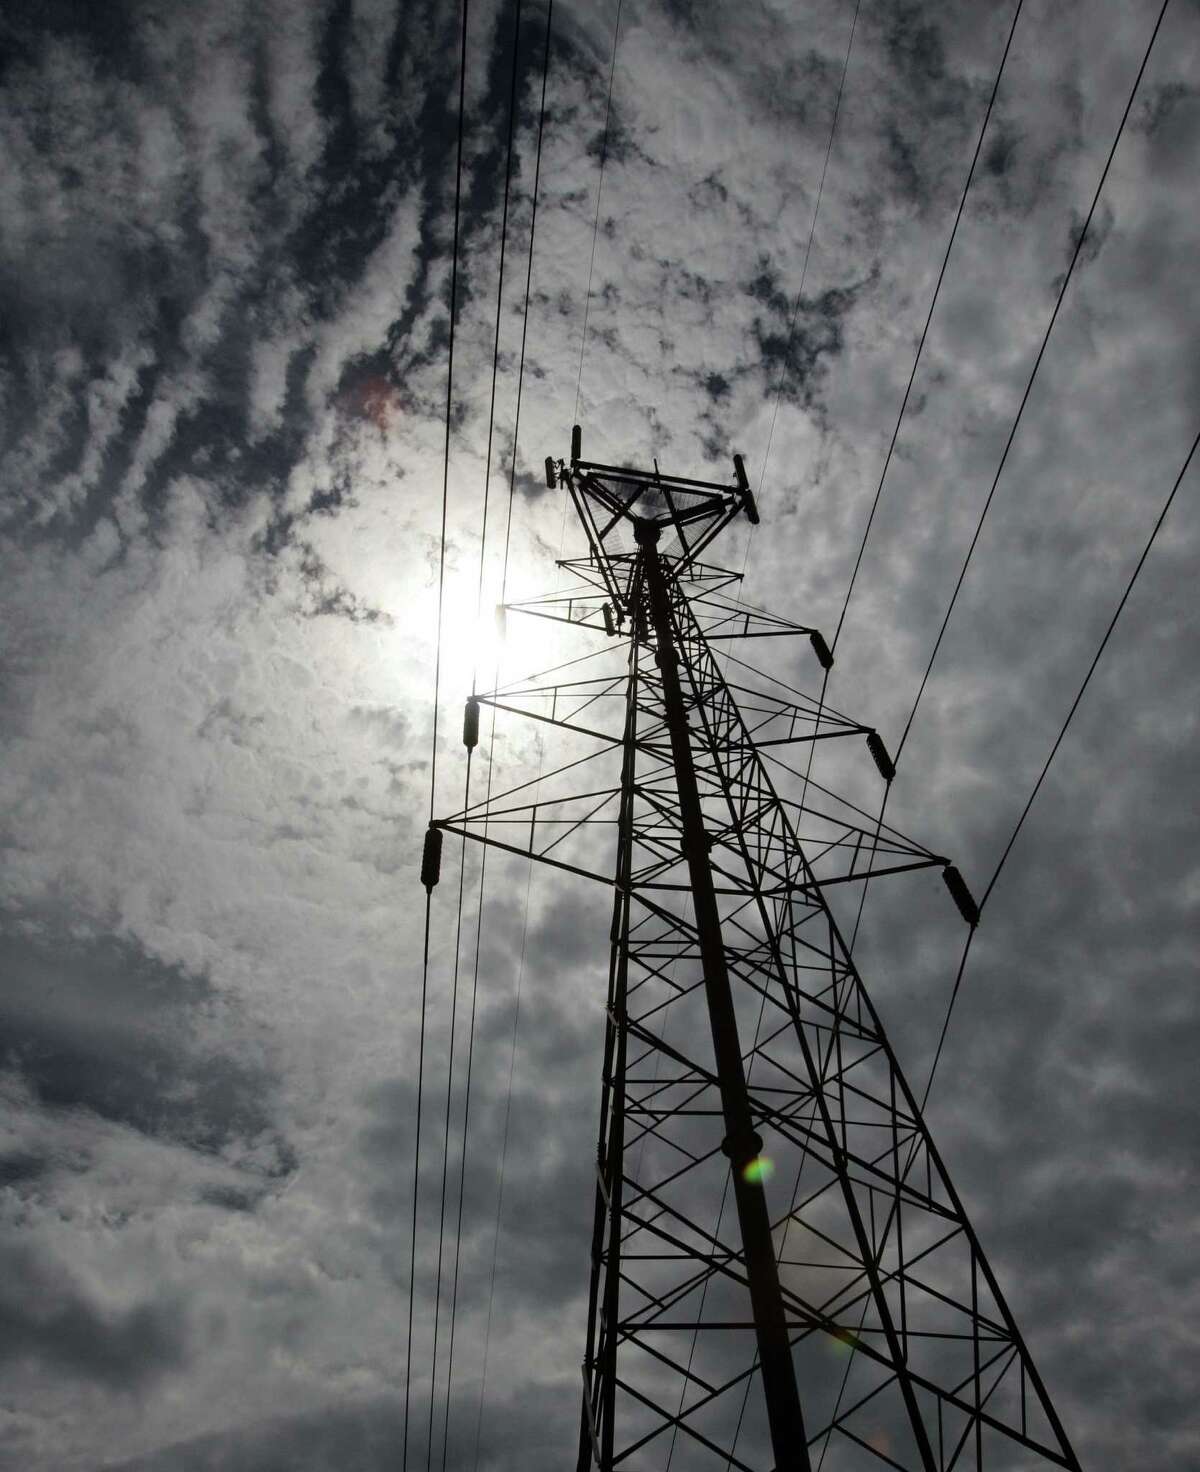 The hot summer of 2011 and more recent cold-weather brushes with blackouts have prompted discussion of whether the state power market's system needs changing.